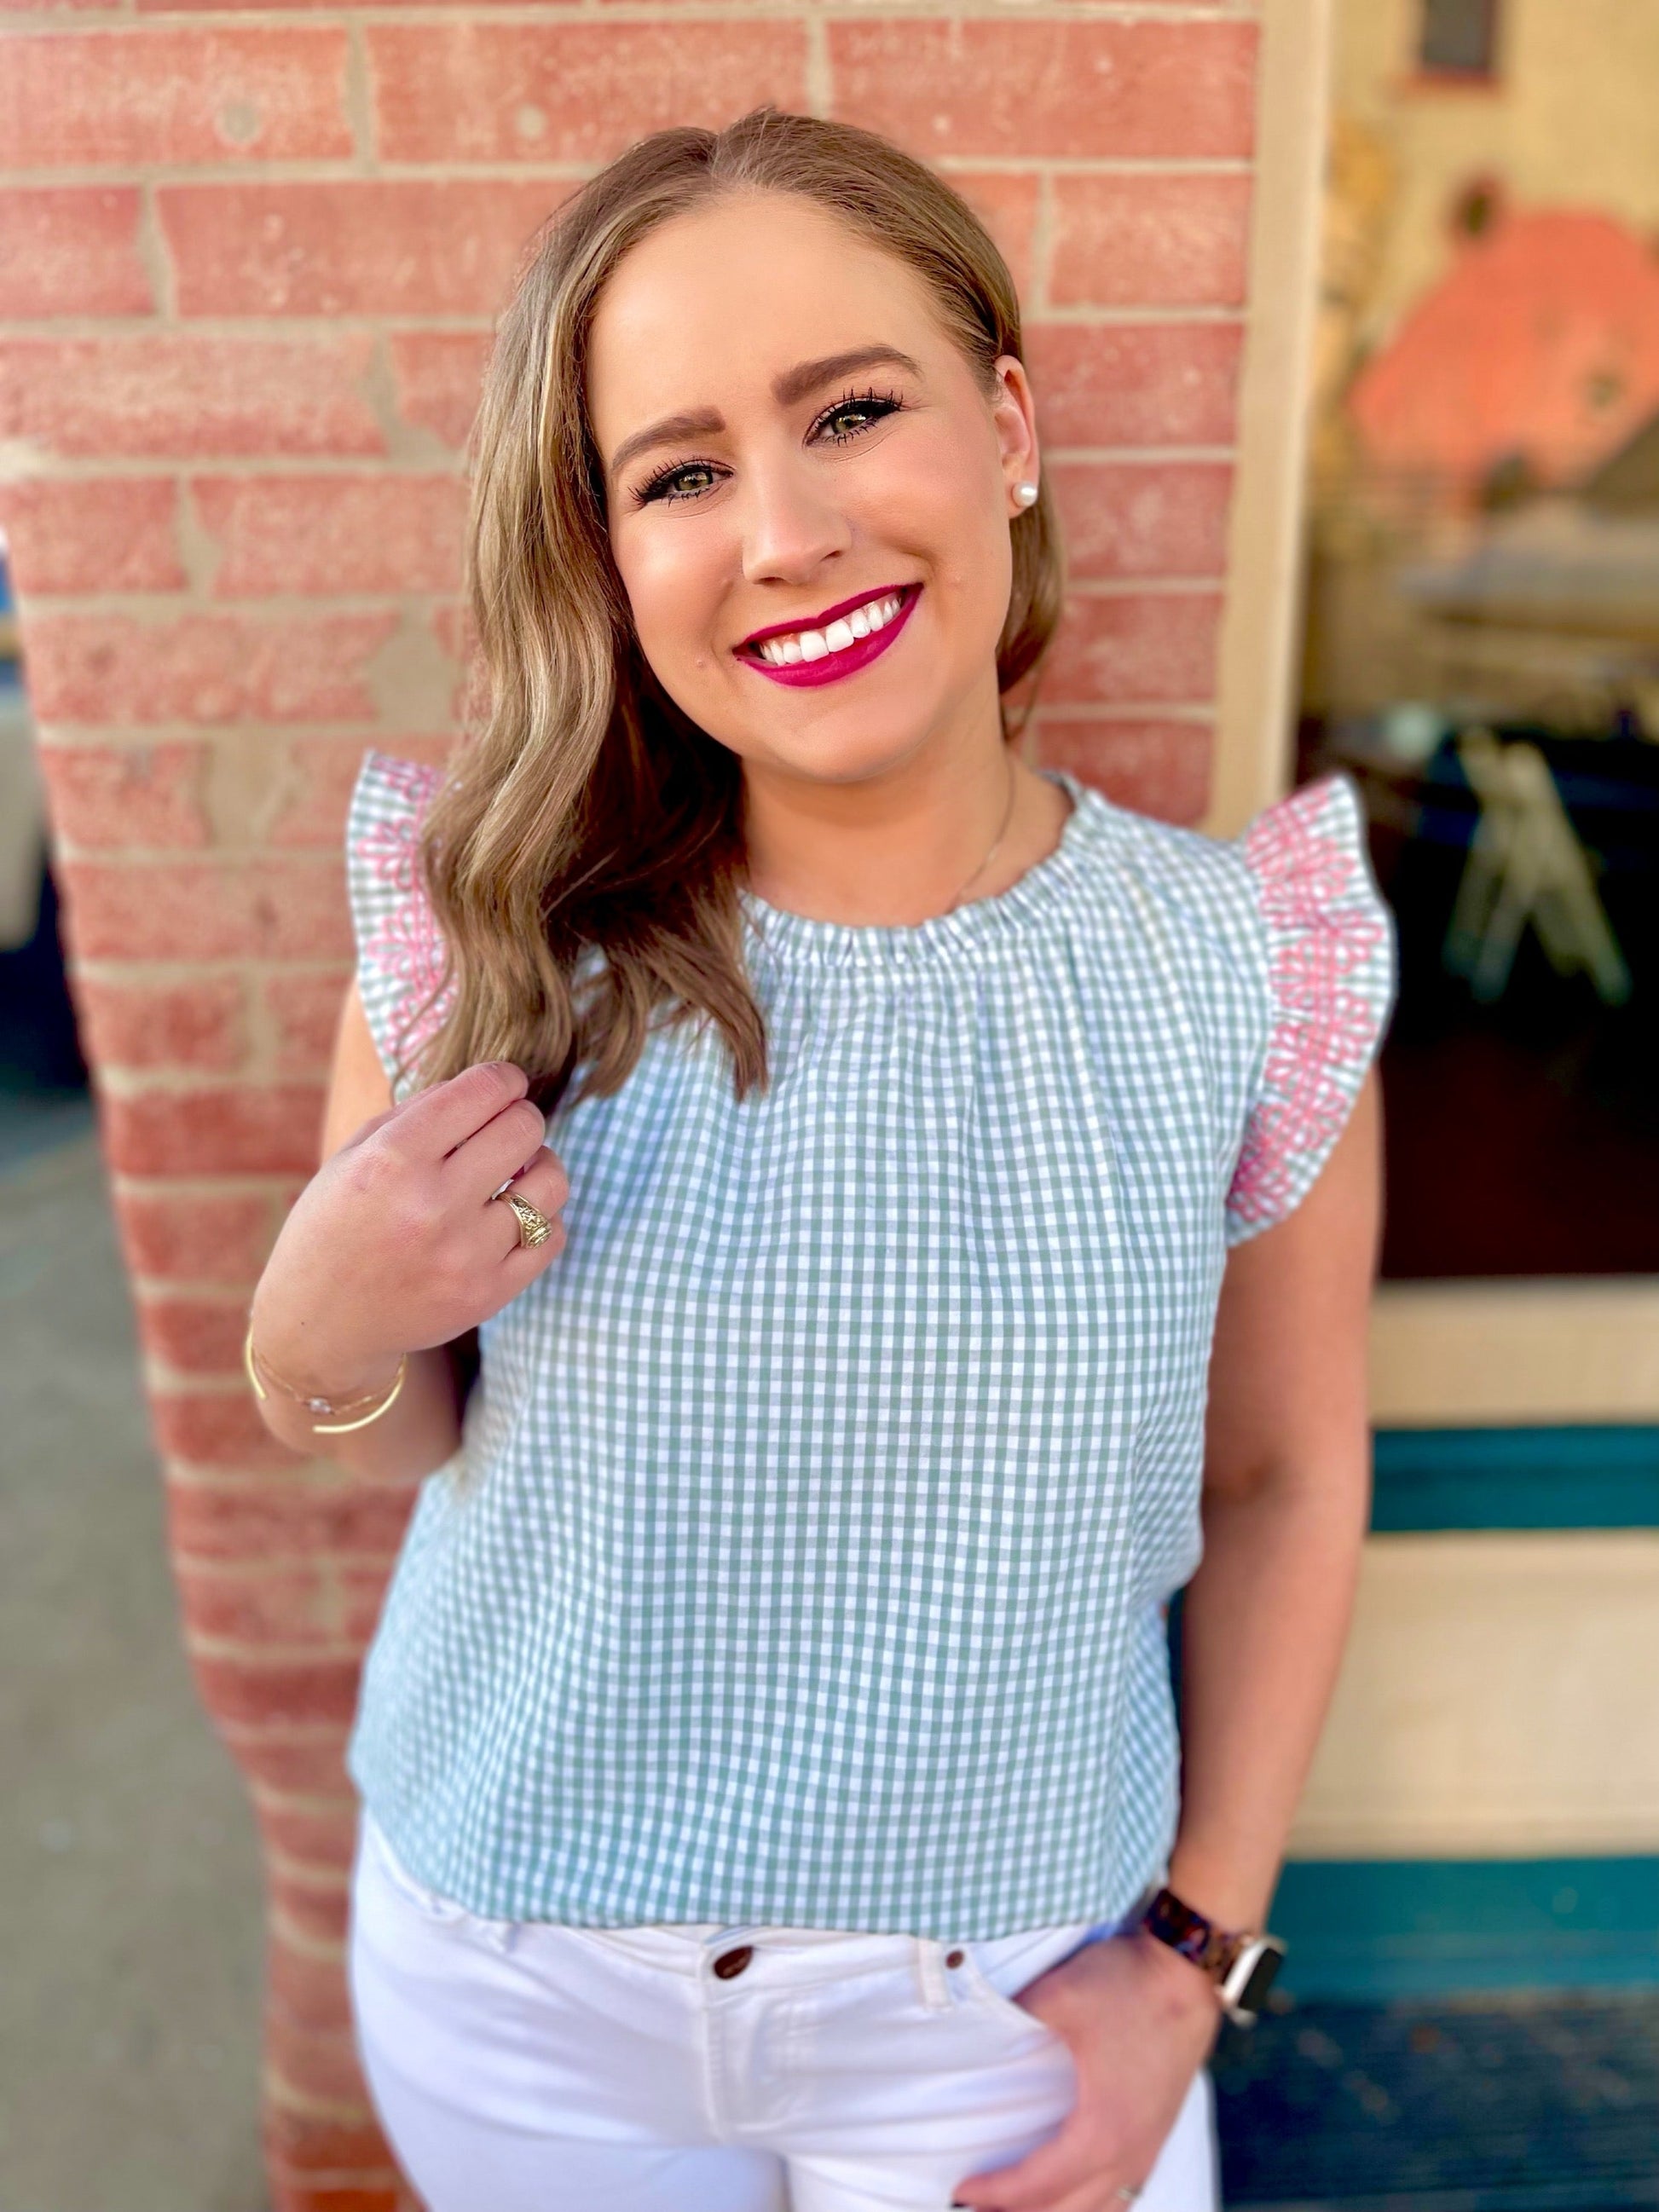 The Audrey Top by Washco Apparel is a beautiful mint green and white gingham print with a pop of pink embroidery design. We love the gathered neckline and ruffled flair sleeves. Pair the Audrey Top with a cardigan or cute denim jacket and make it a great top for year round!